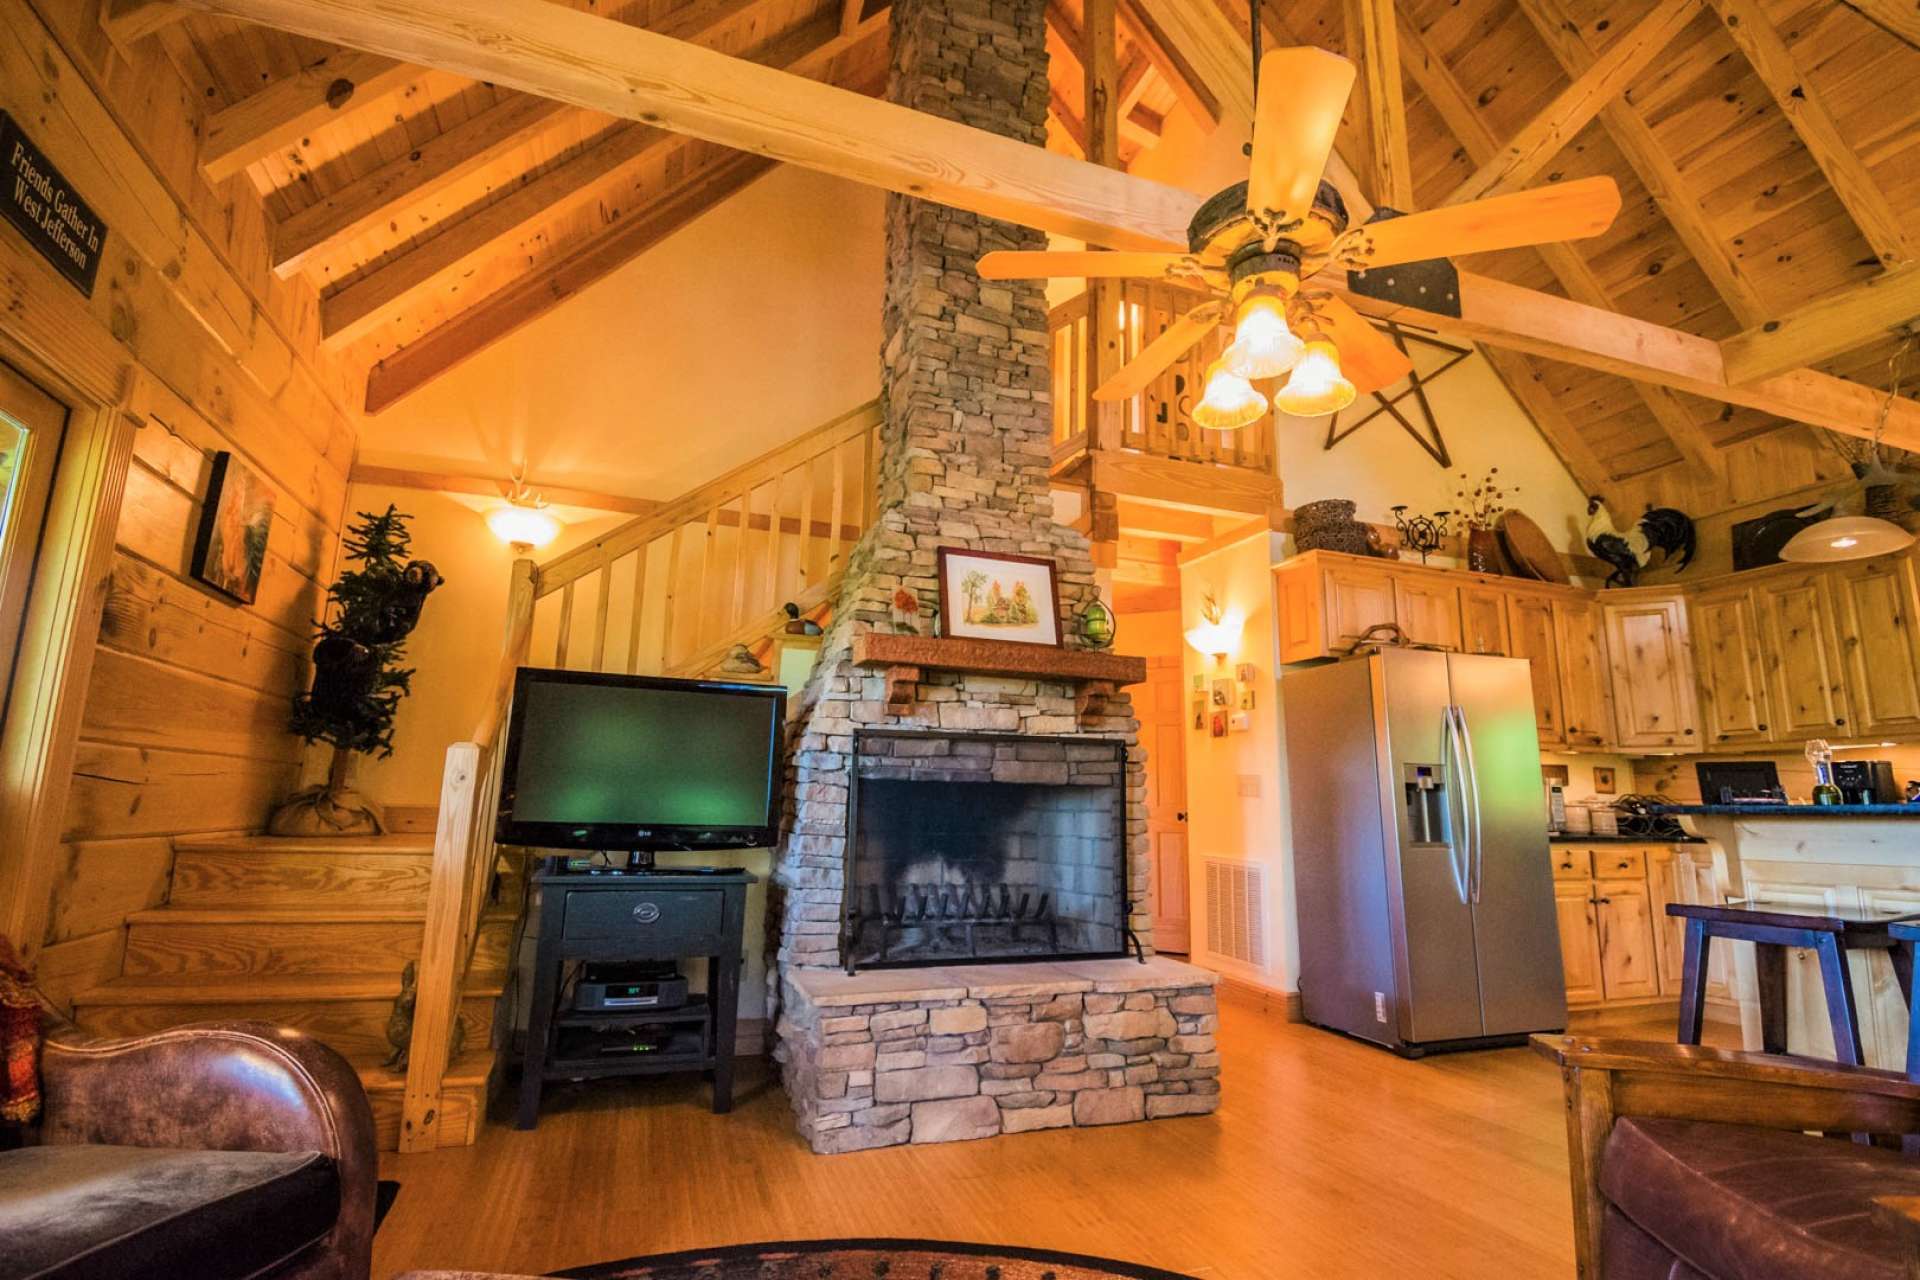 This photo shows the majesty of the fireplace and vaulted wood ceiling. Also, notice the Bamboo wood flooring creating a warm glow.